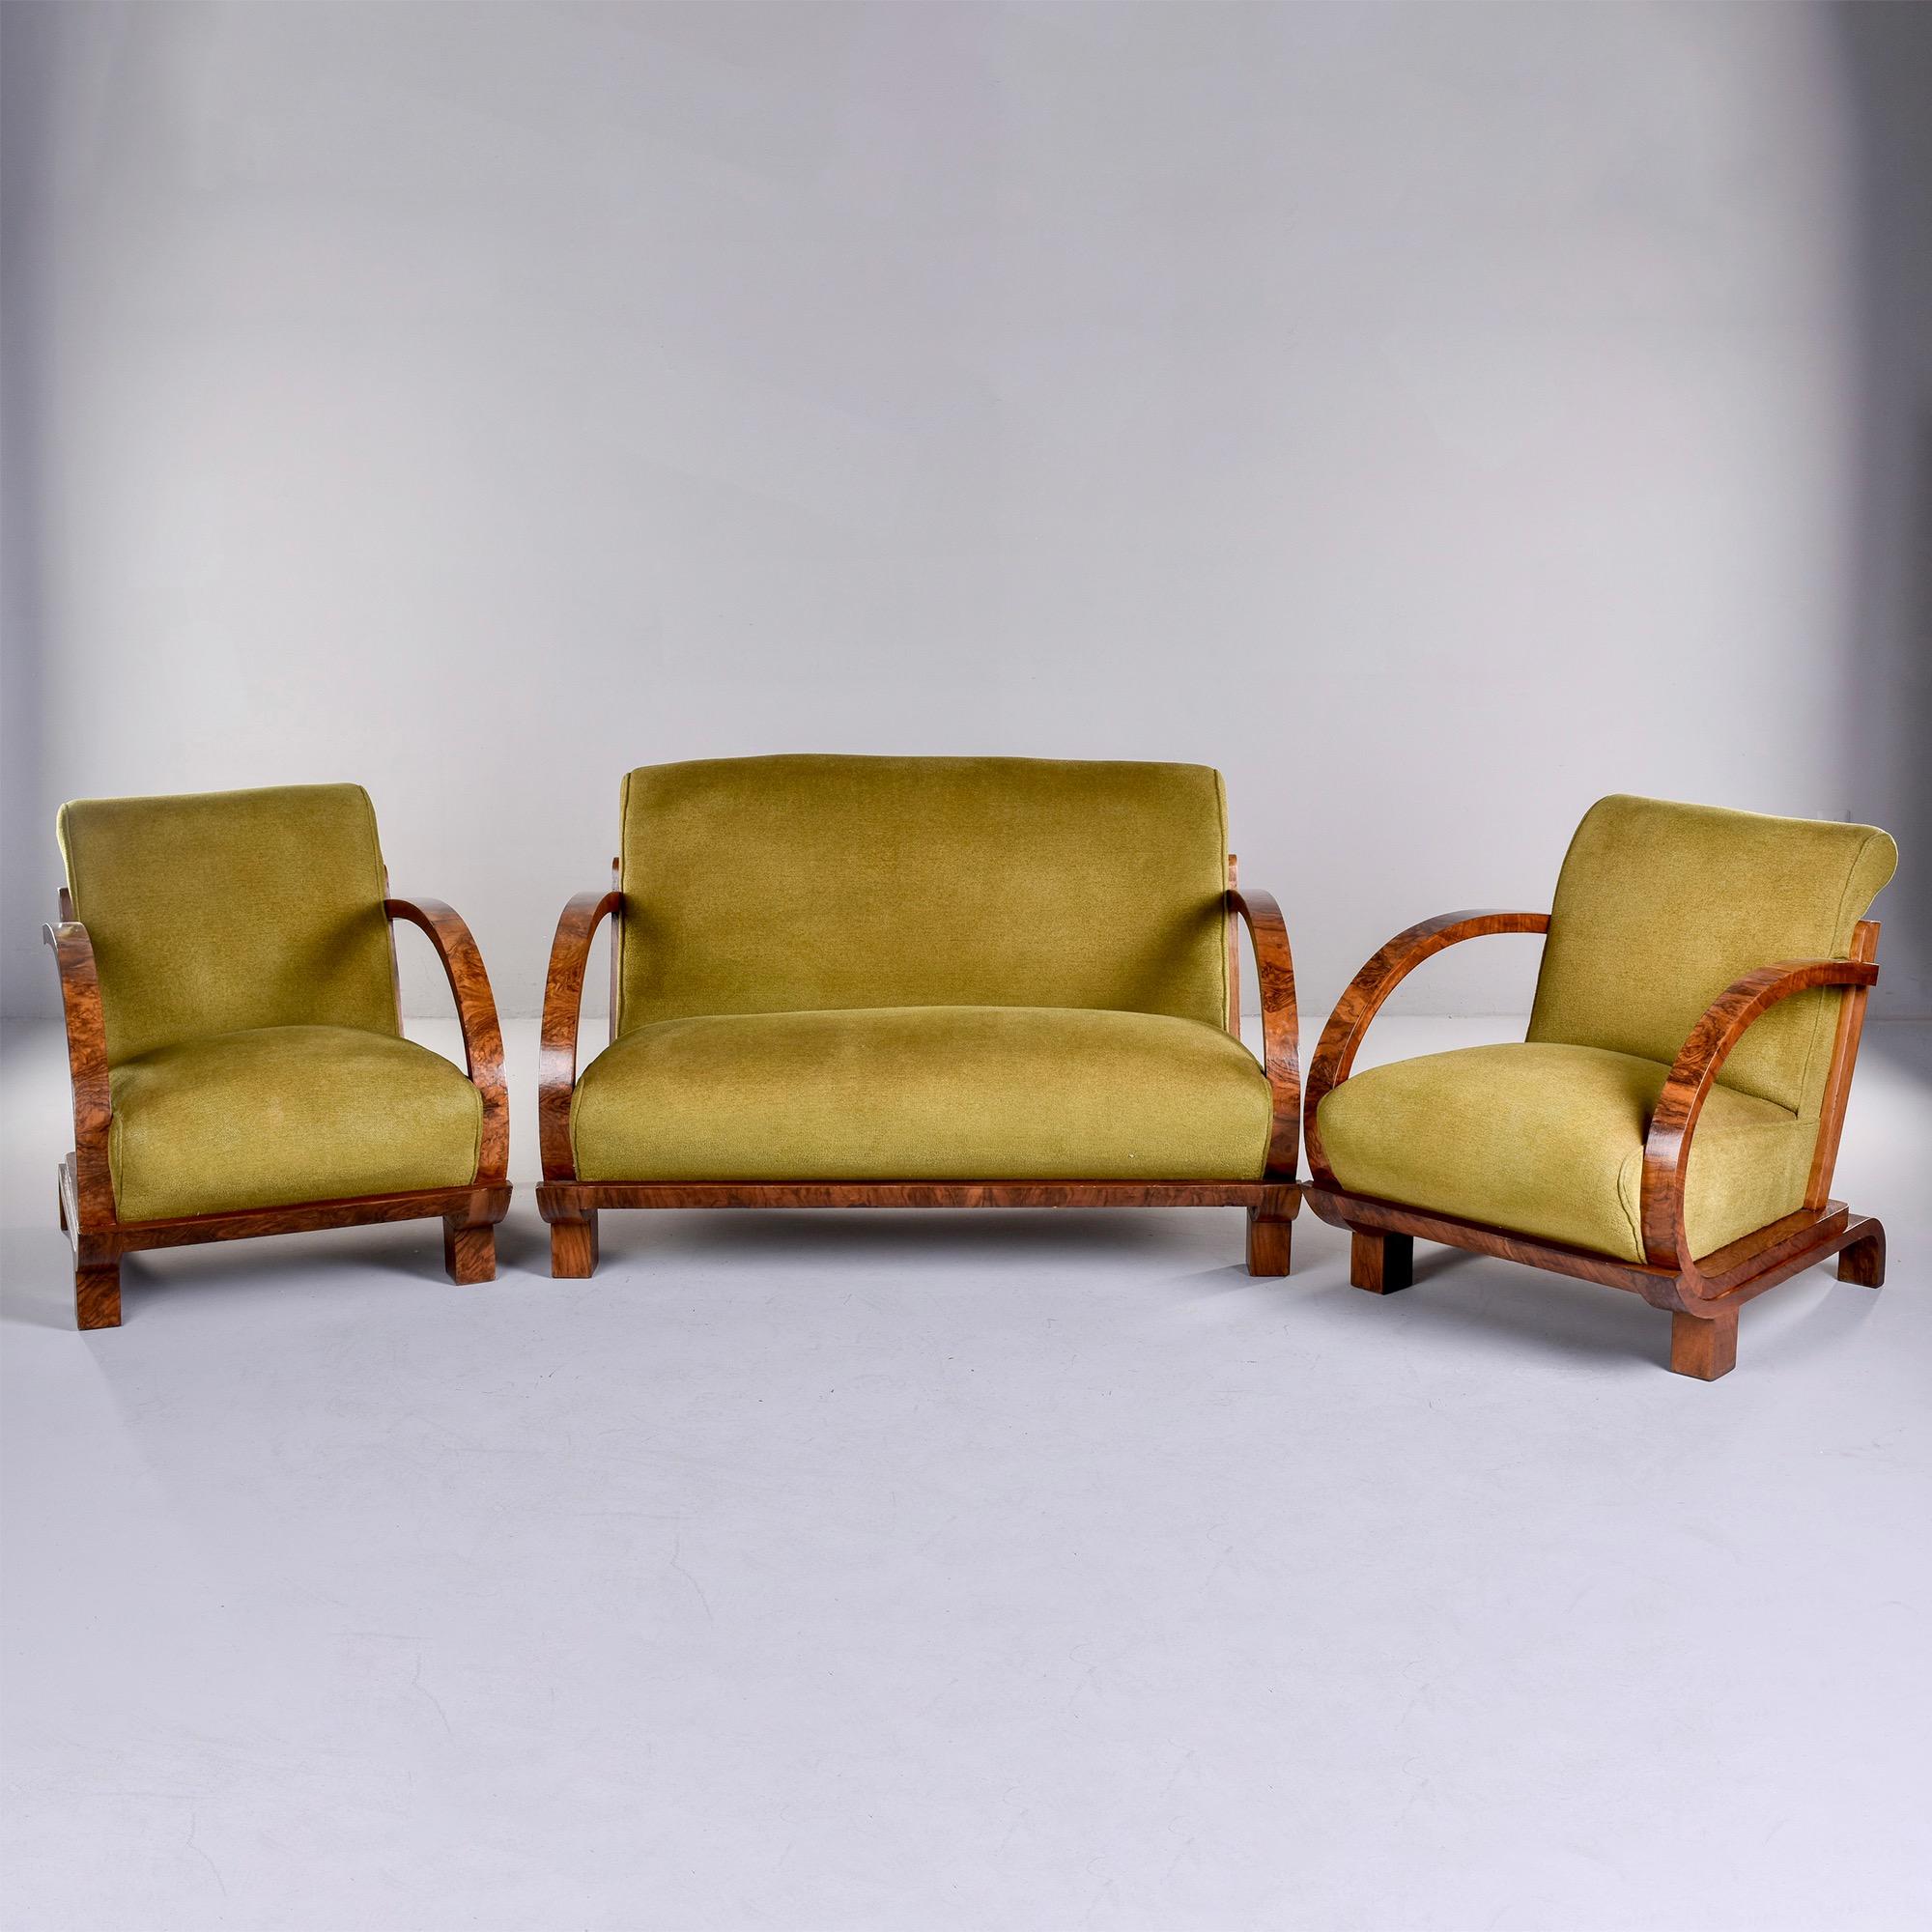 Pair French Art Deco Walnut Bentwood Armchairs with Original Upholstery 9